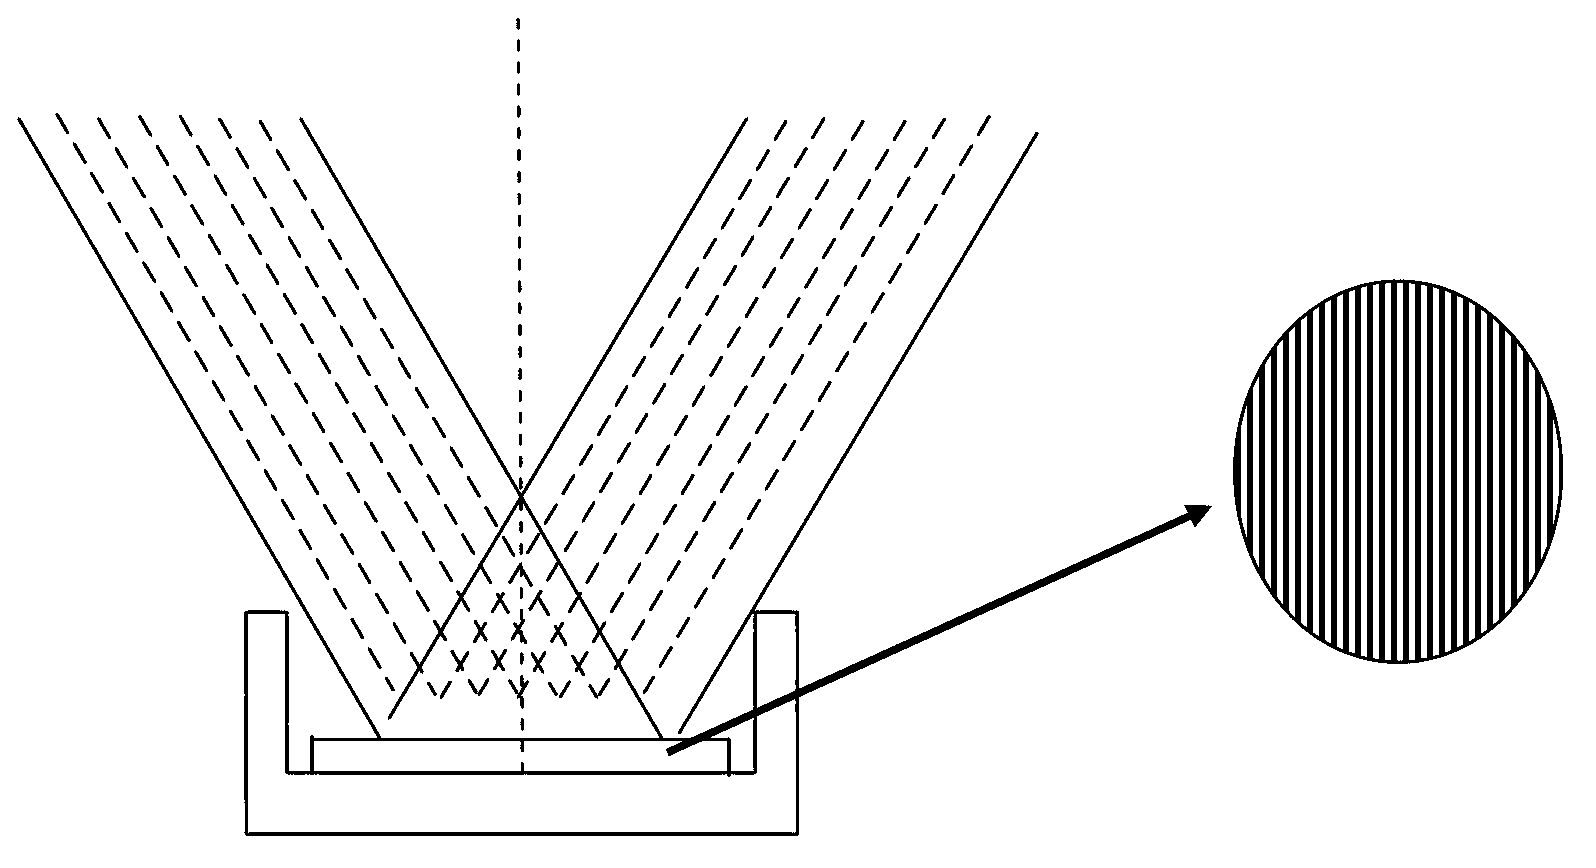 Method for implementing light emitting diode surface pattern preparation by using two-beam interference for assisting wet etching